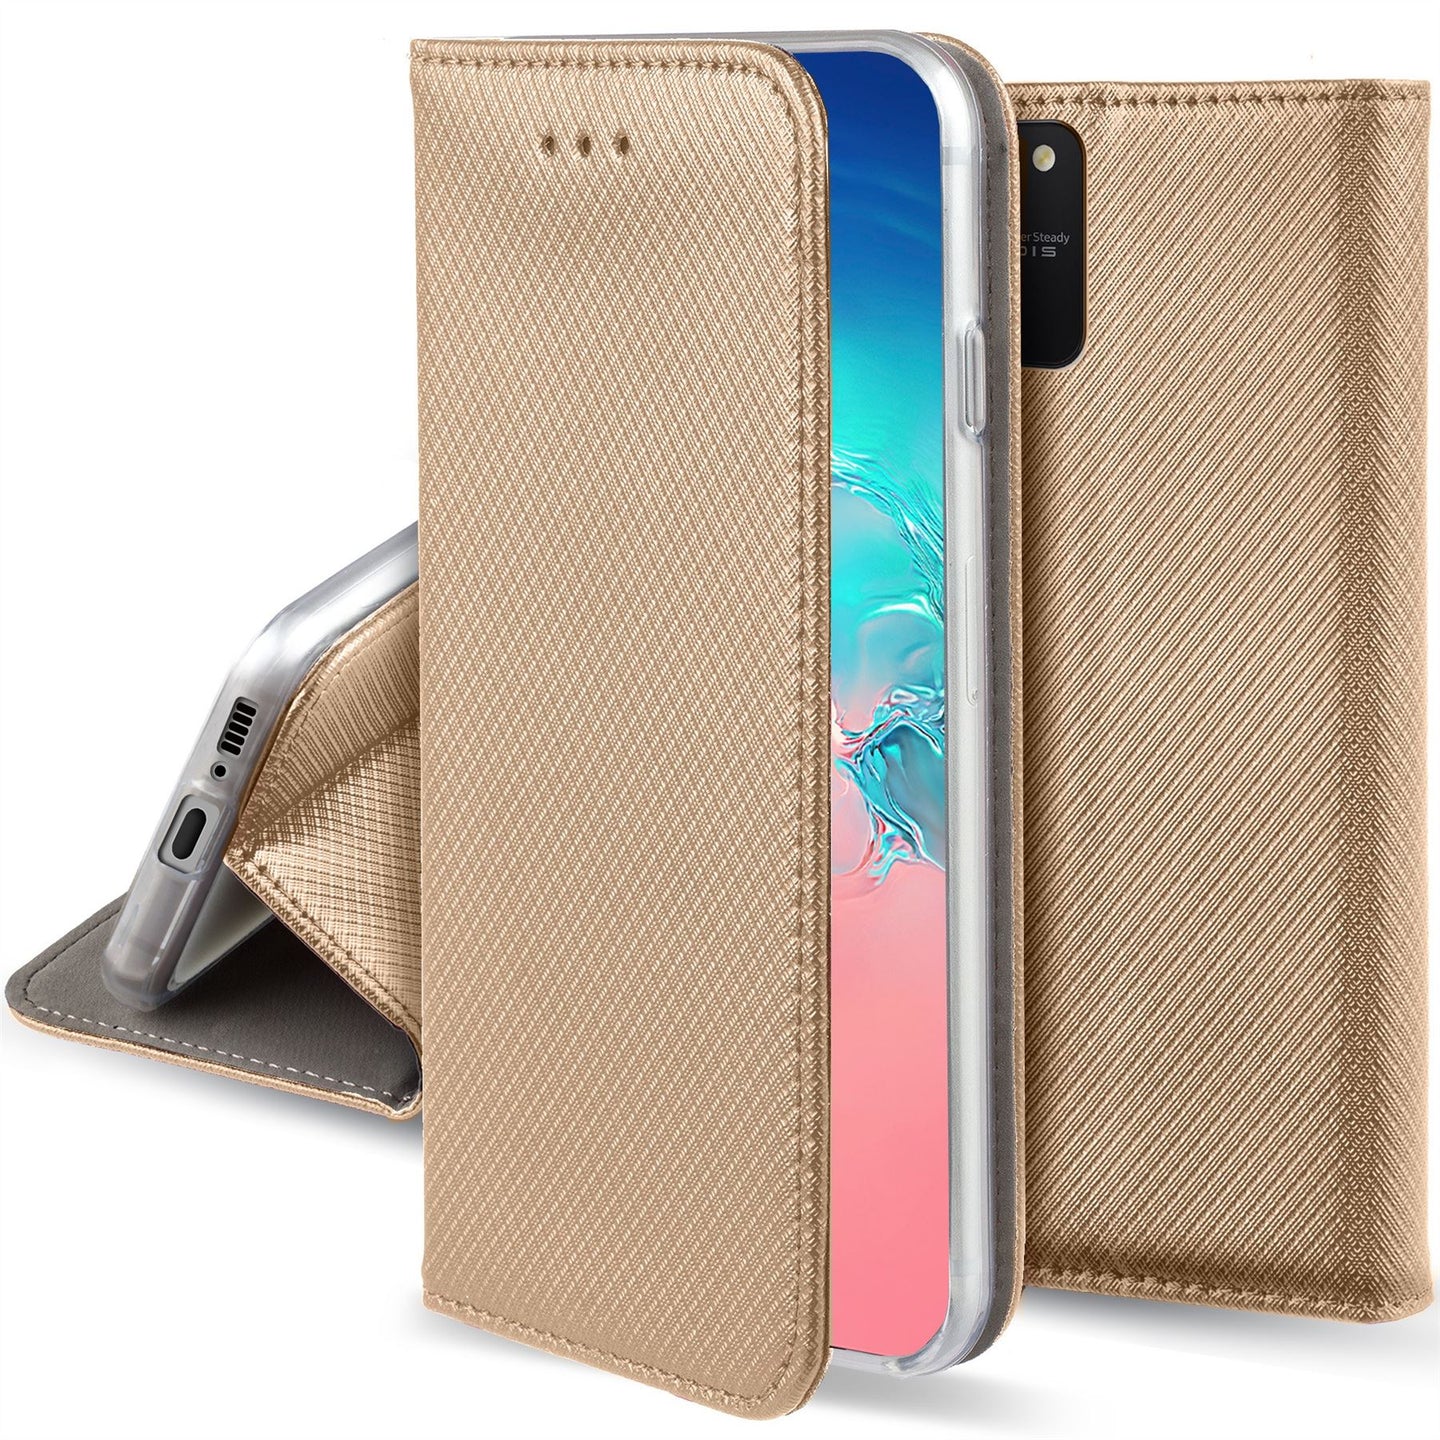 Moozy Case Flip Cover for Samsung S10 Lite, Gold - Smart Magnetic Flip Case with Card Holder and Stand